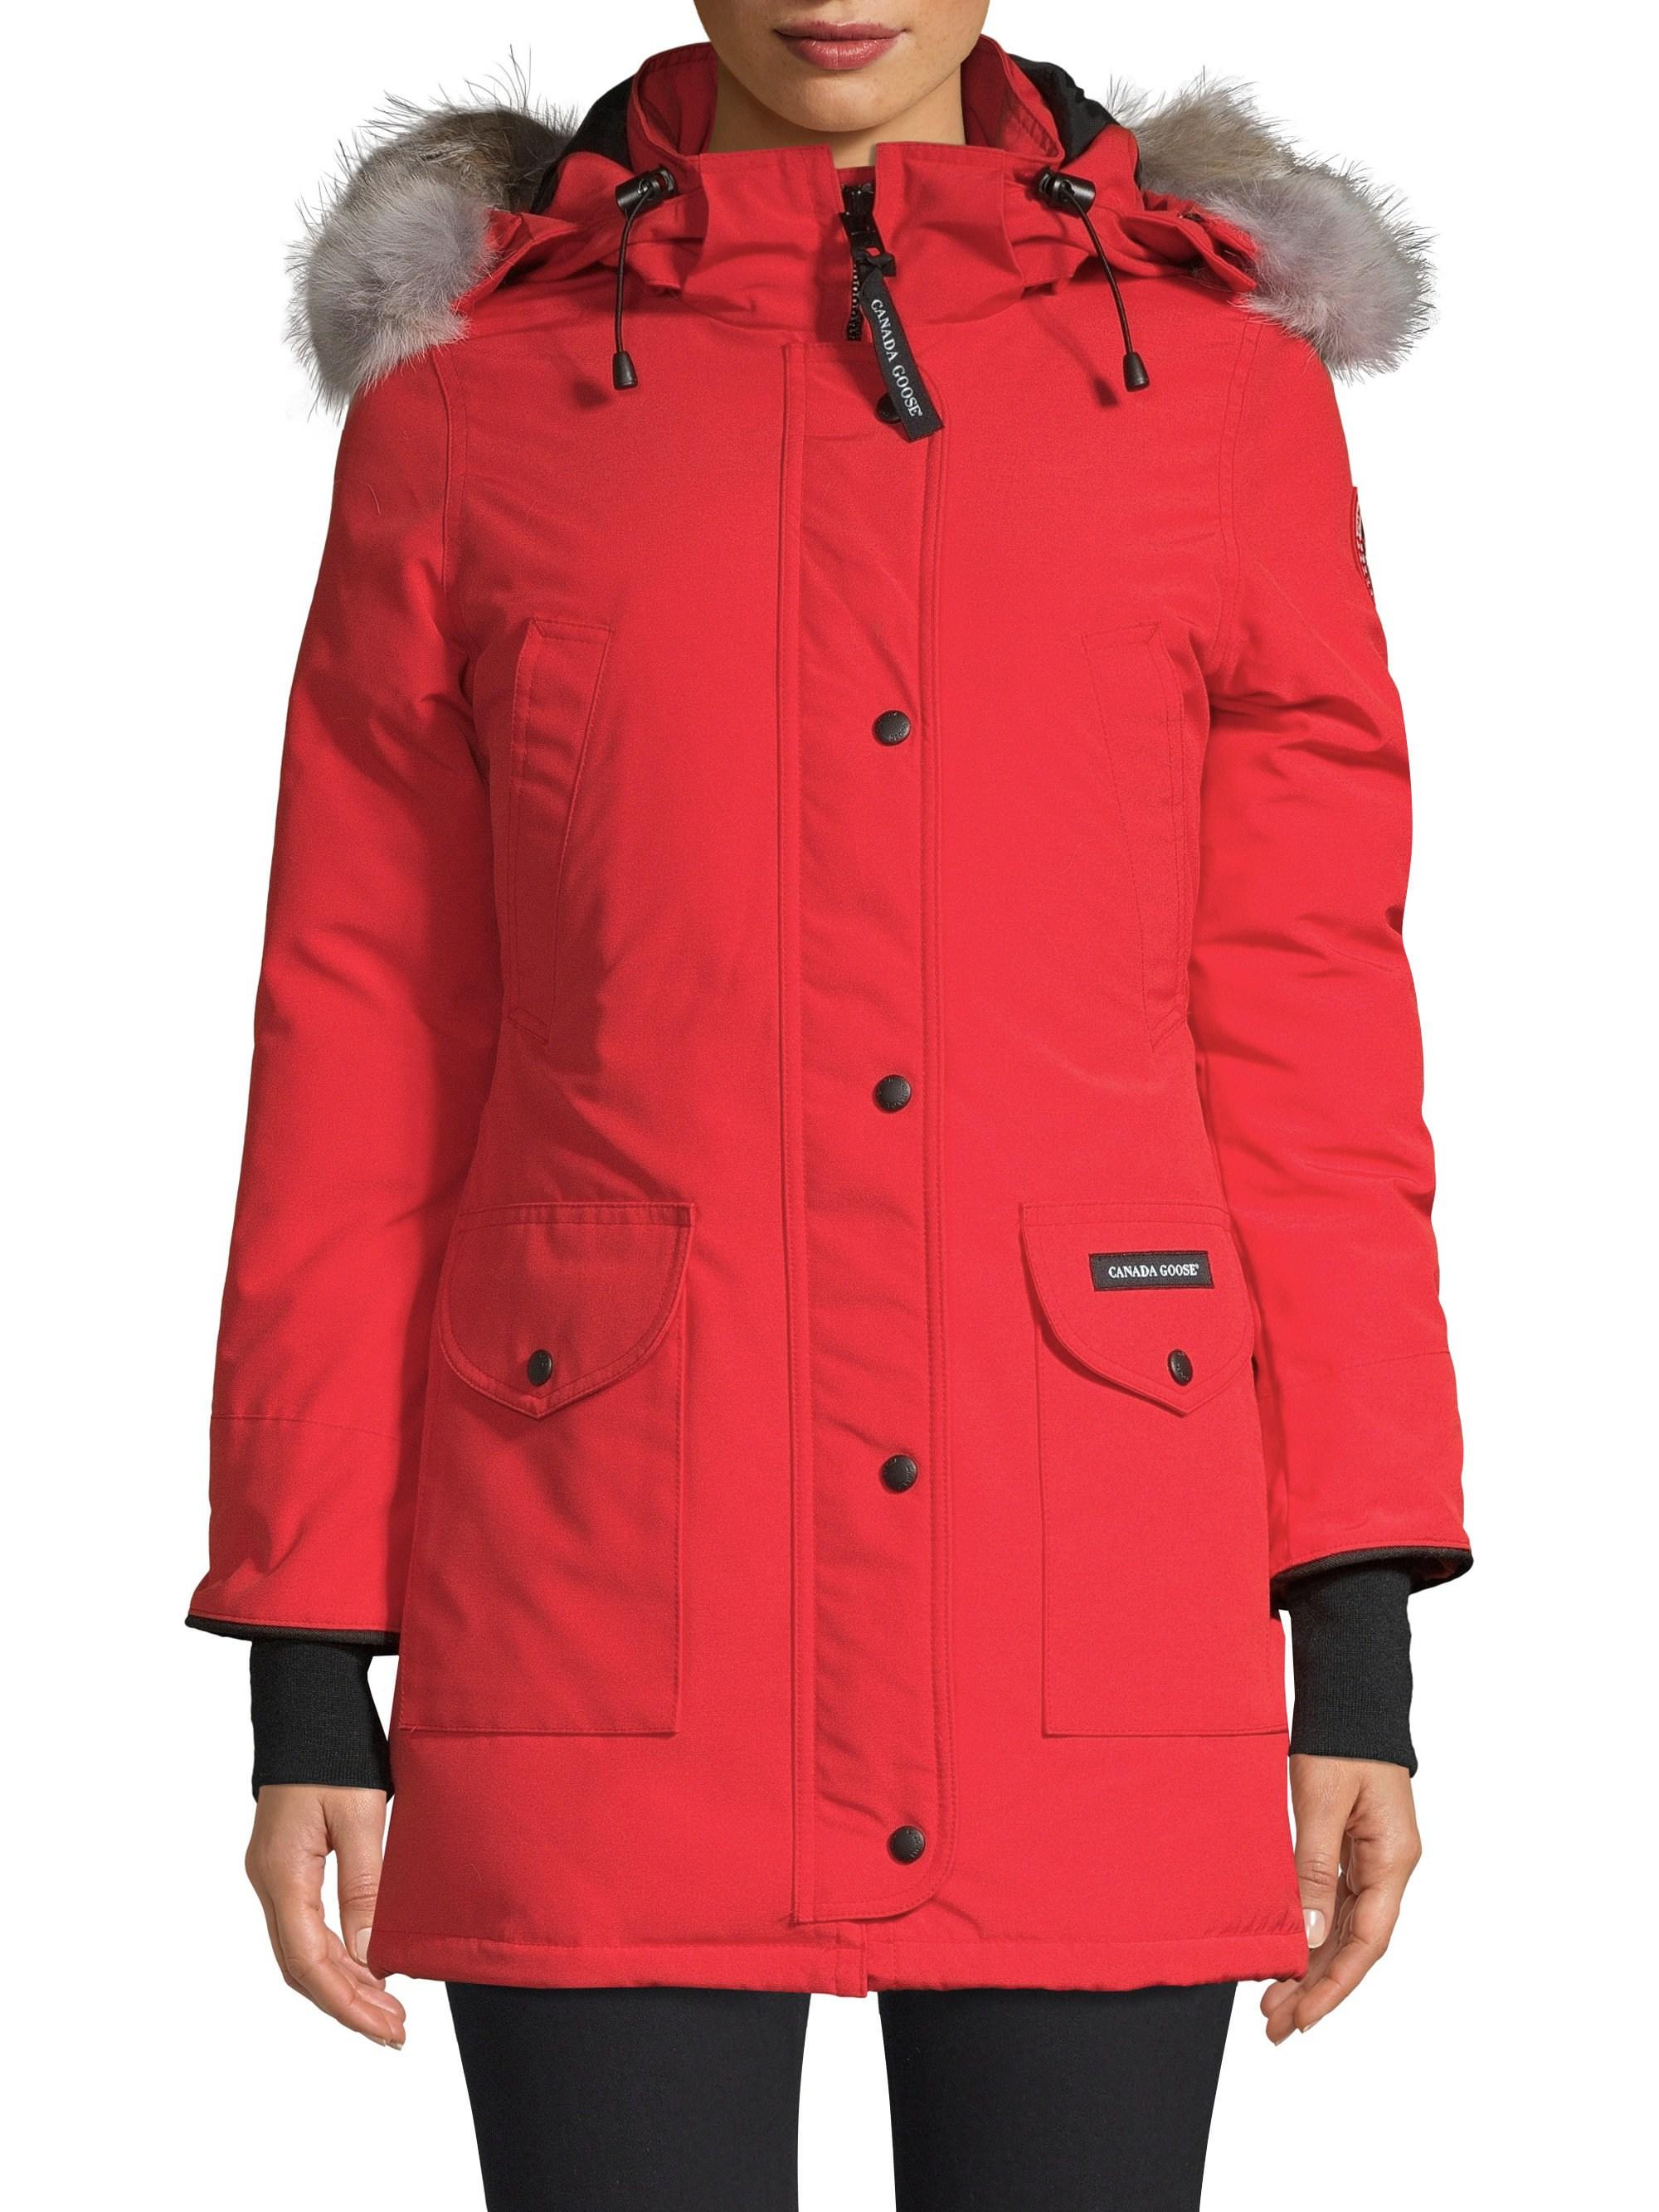 Canada Goose Trillium Fur-trimmed Fusion Fit Parka in Red - Lyst